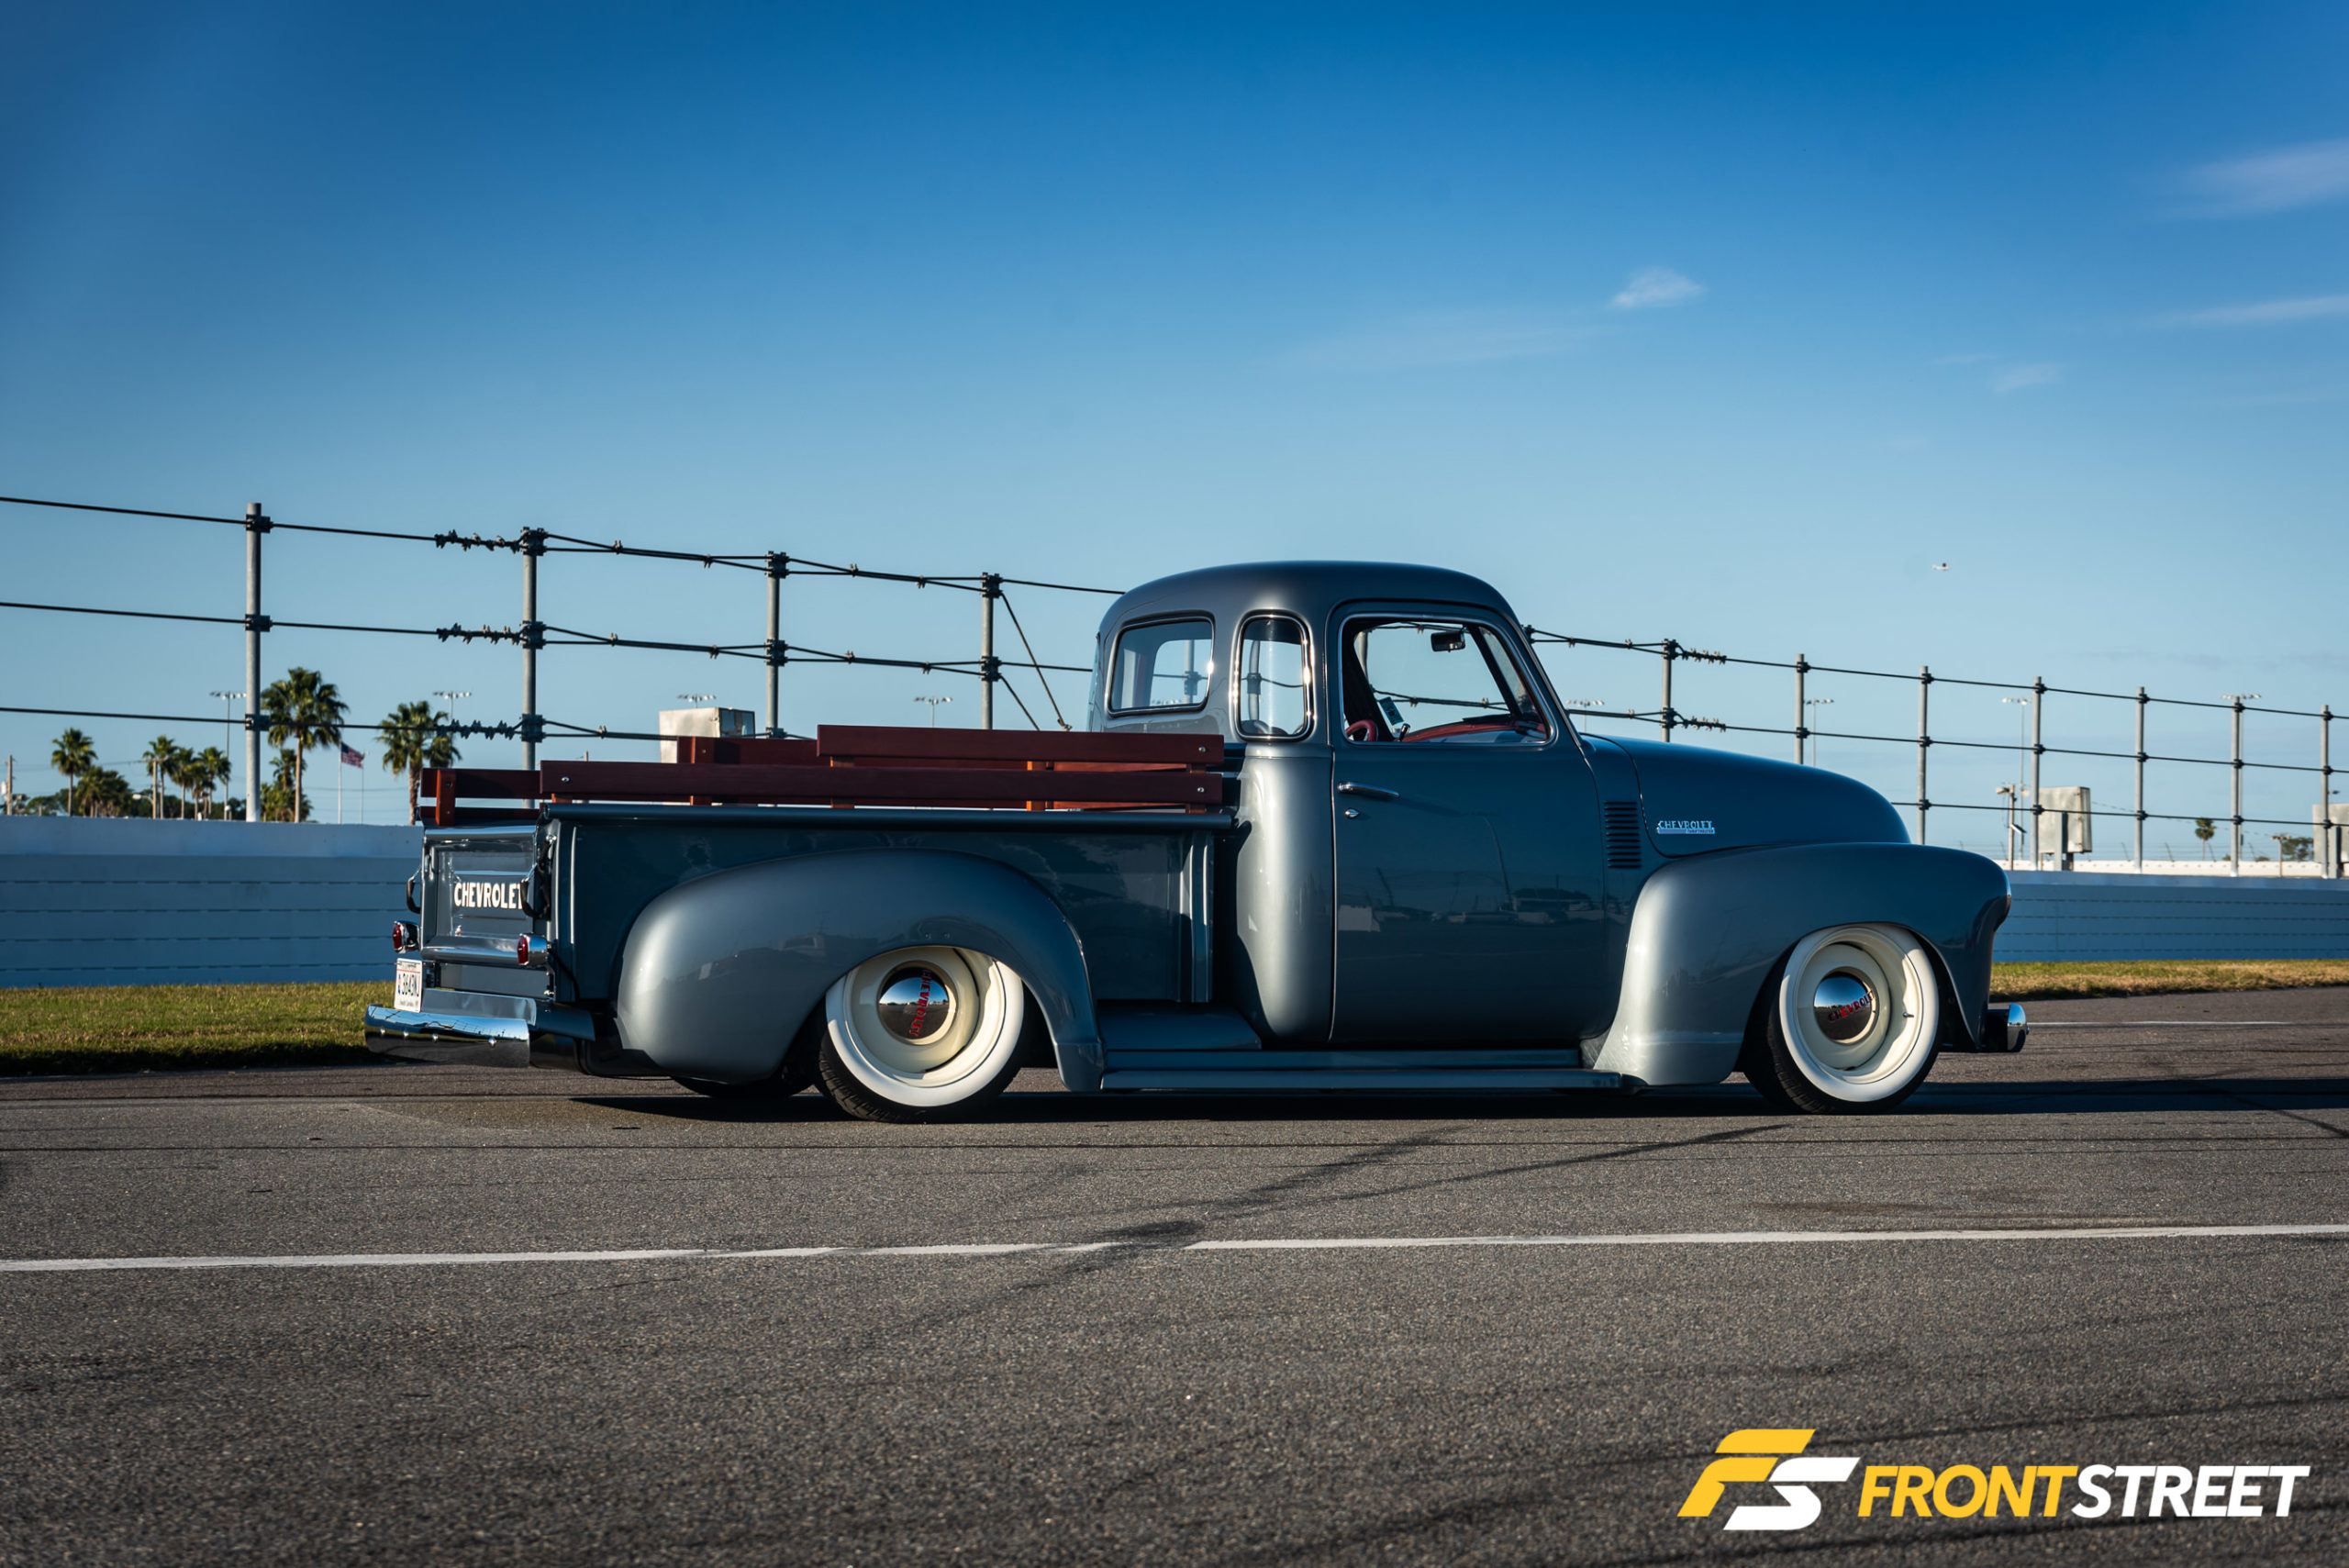 This Beautiful '48 Chevy 3100 Is A Tribute To Dedication & Perseverance